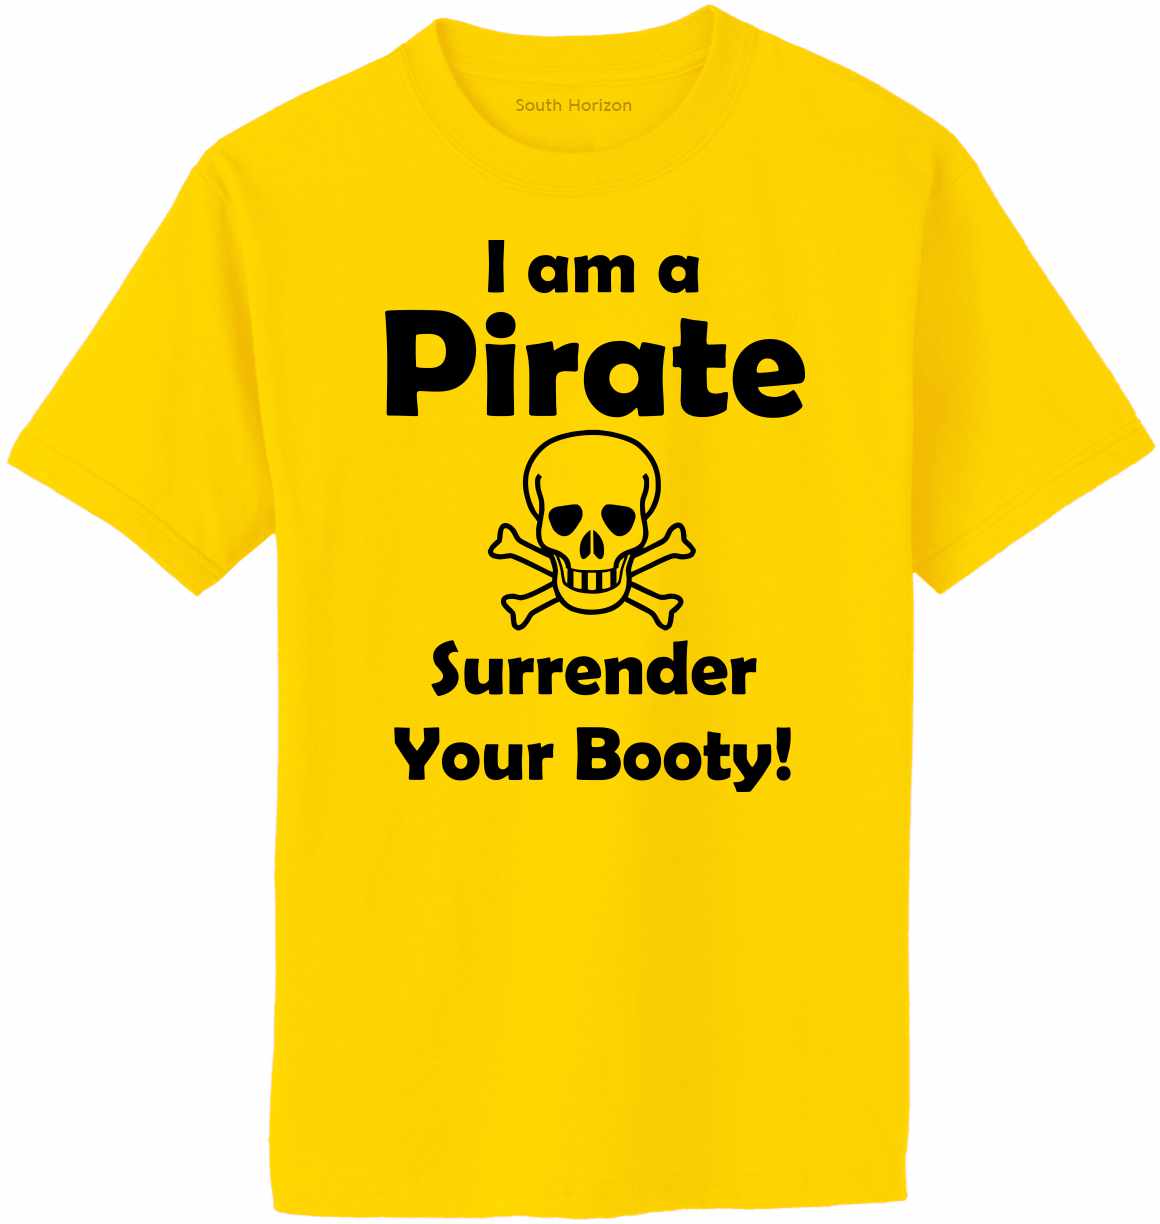 I am a Pirate, Surrender Your Booty Adult T-Shirt (#807-1)